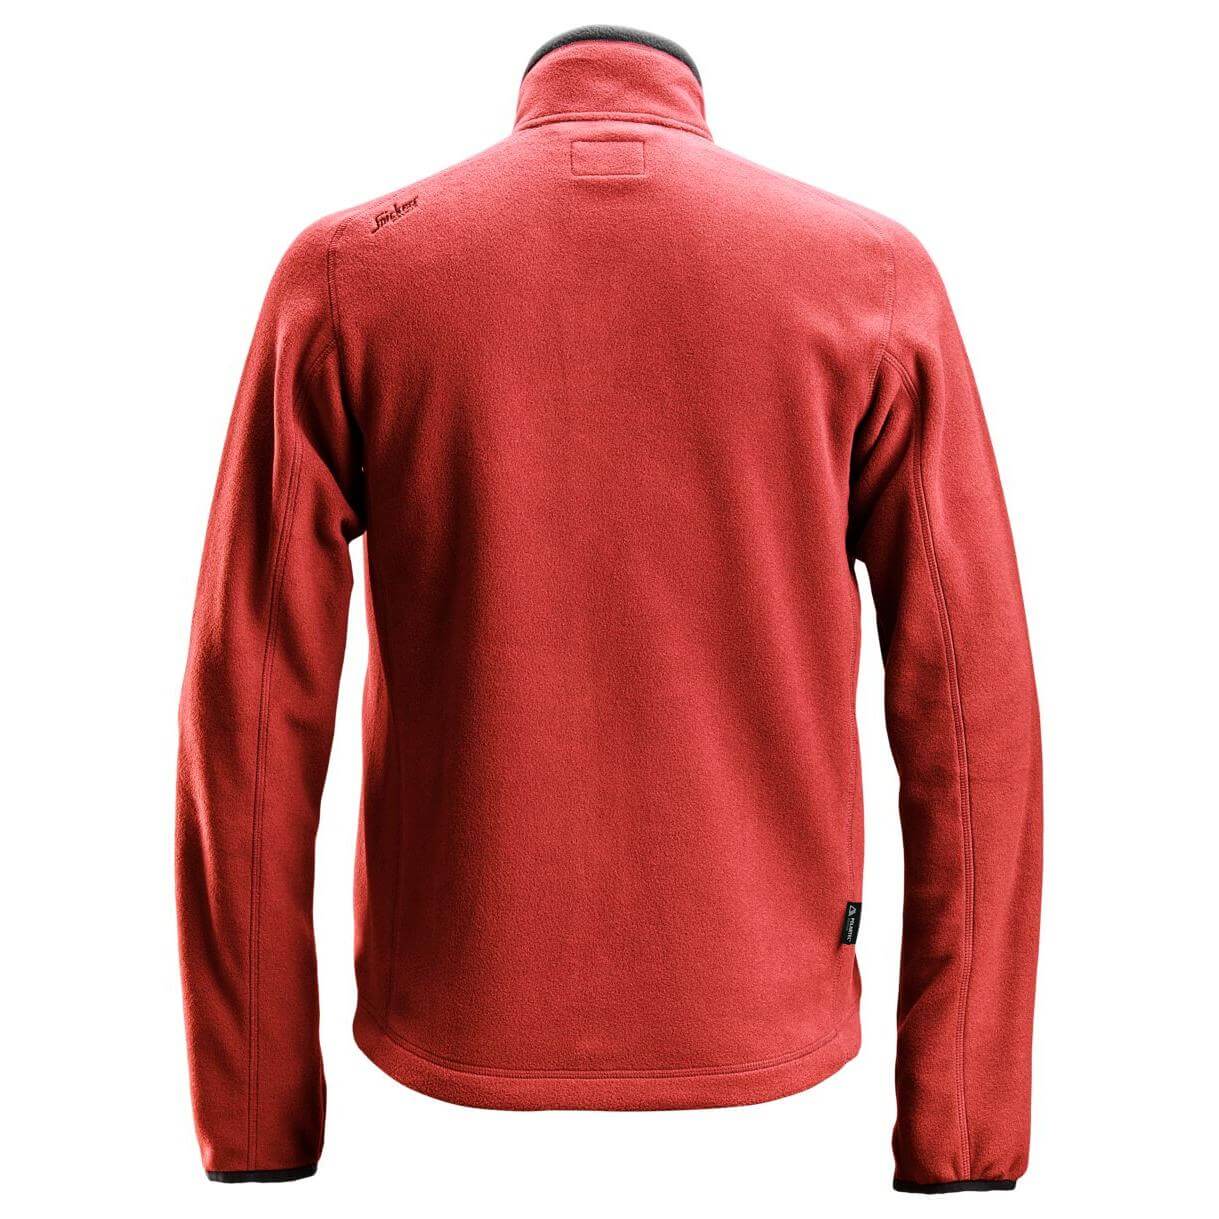 Snickers 8022 AllroundWork Warm Lightweight Fleece Jacket Chili Red Black back #colour_chili-red-black